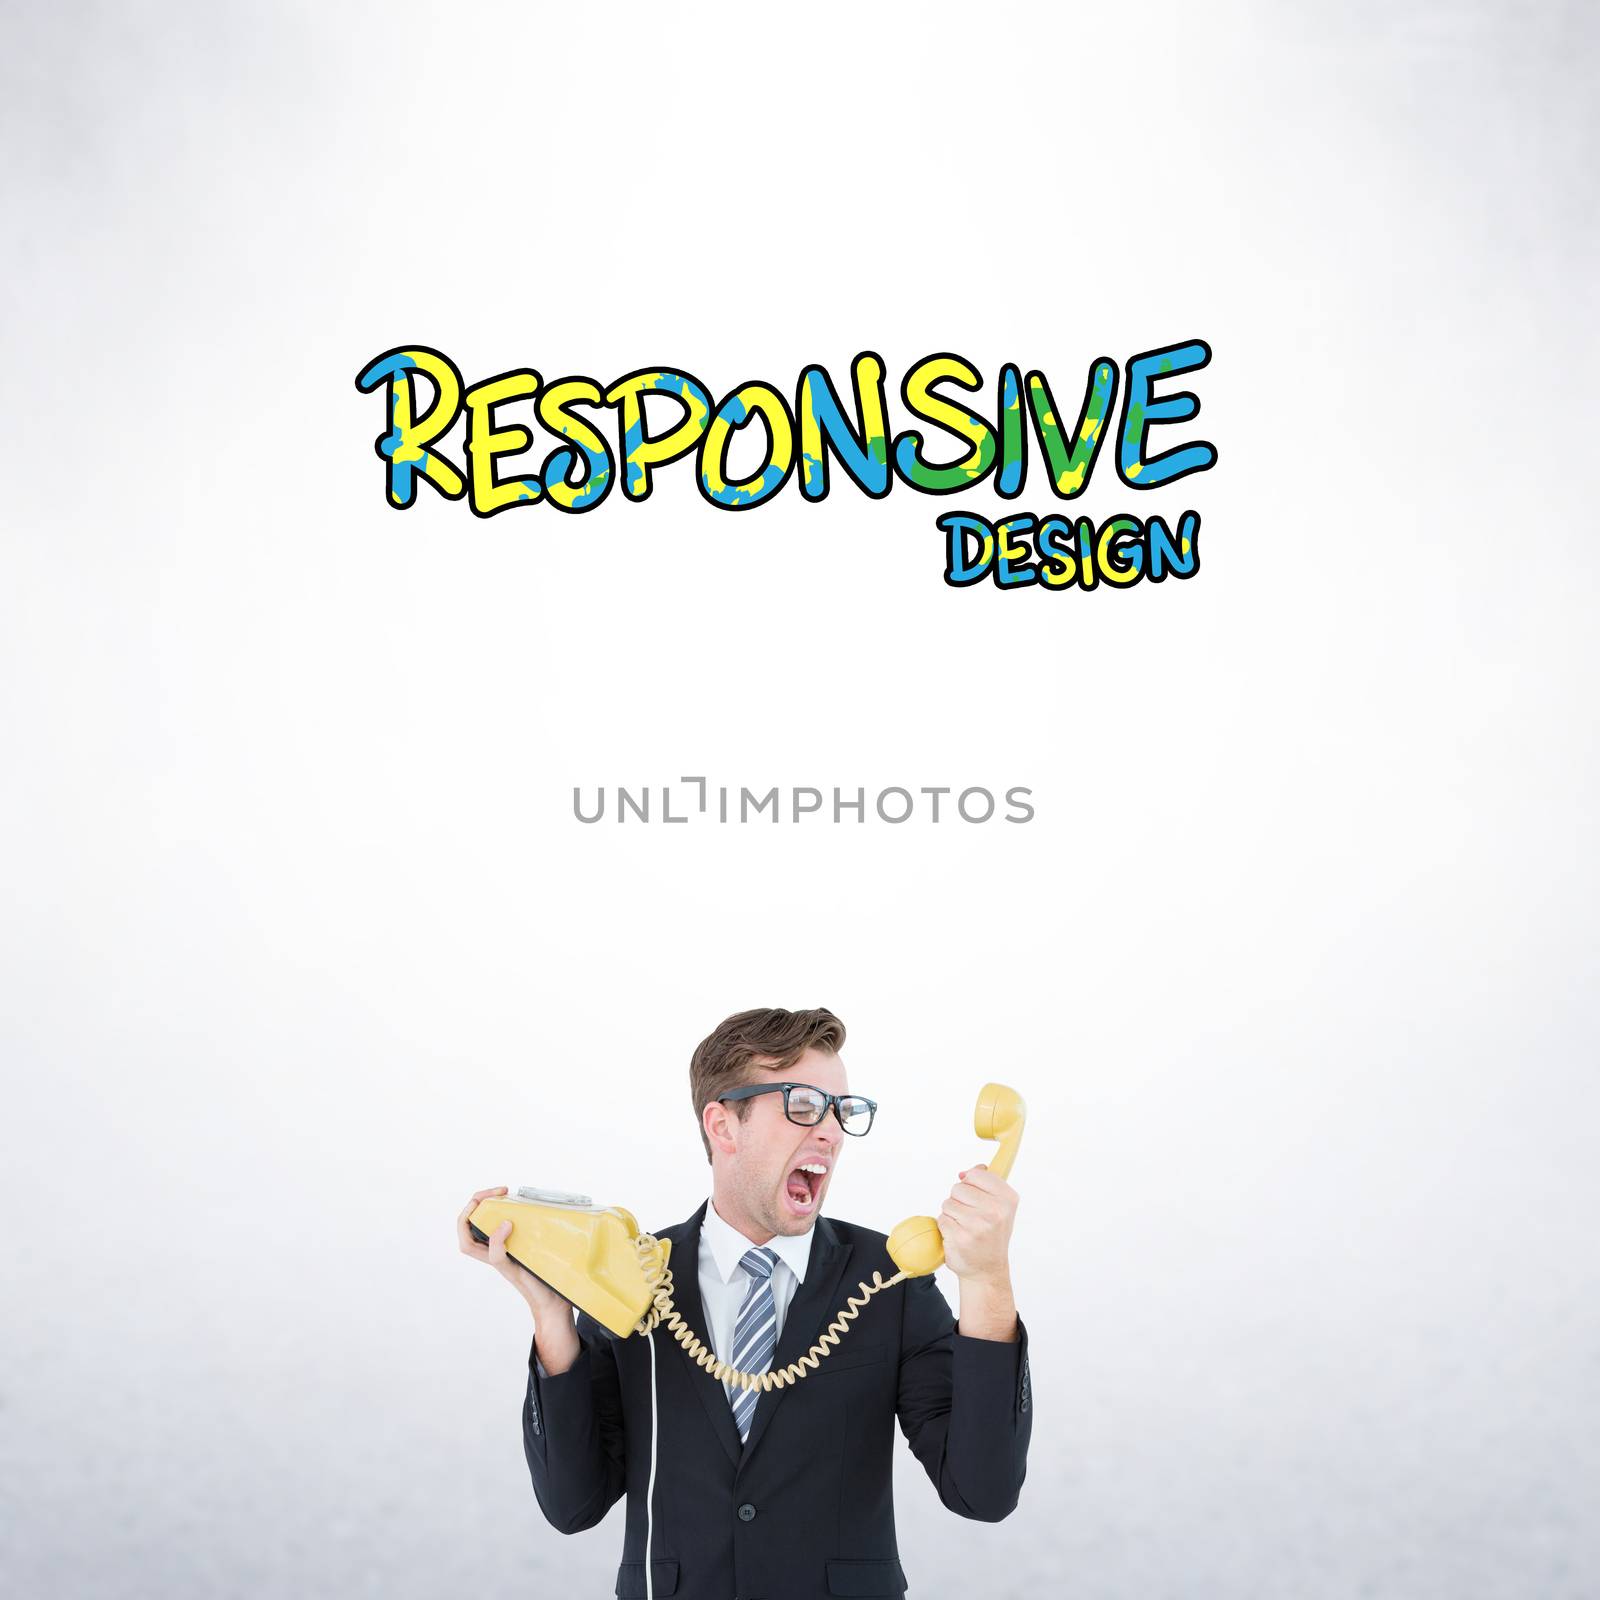 Composite image of geeky businessman shouting at telephone by Wavebreakmedia